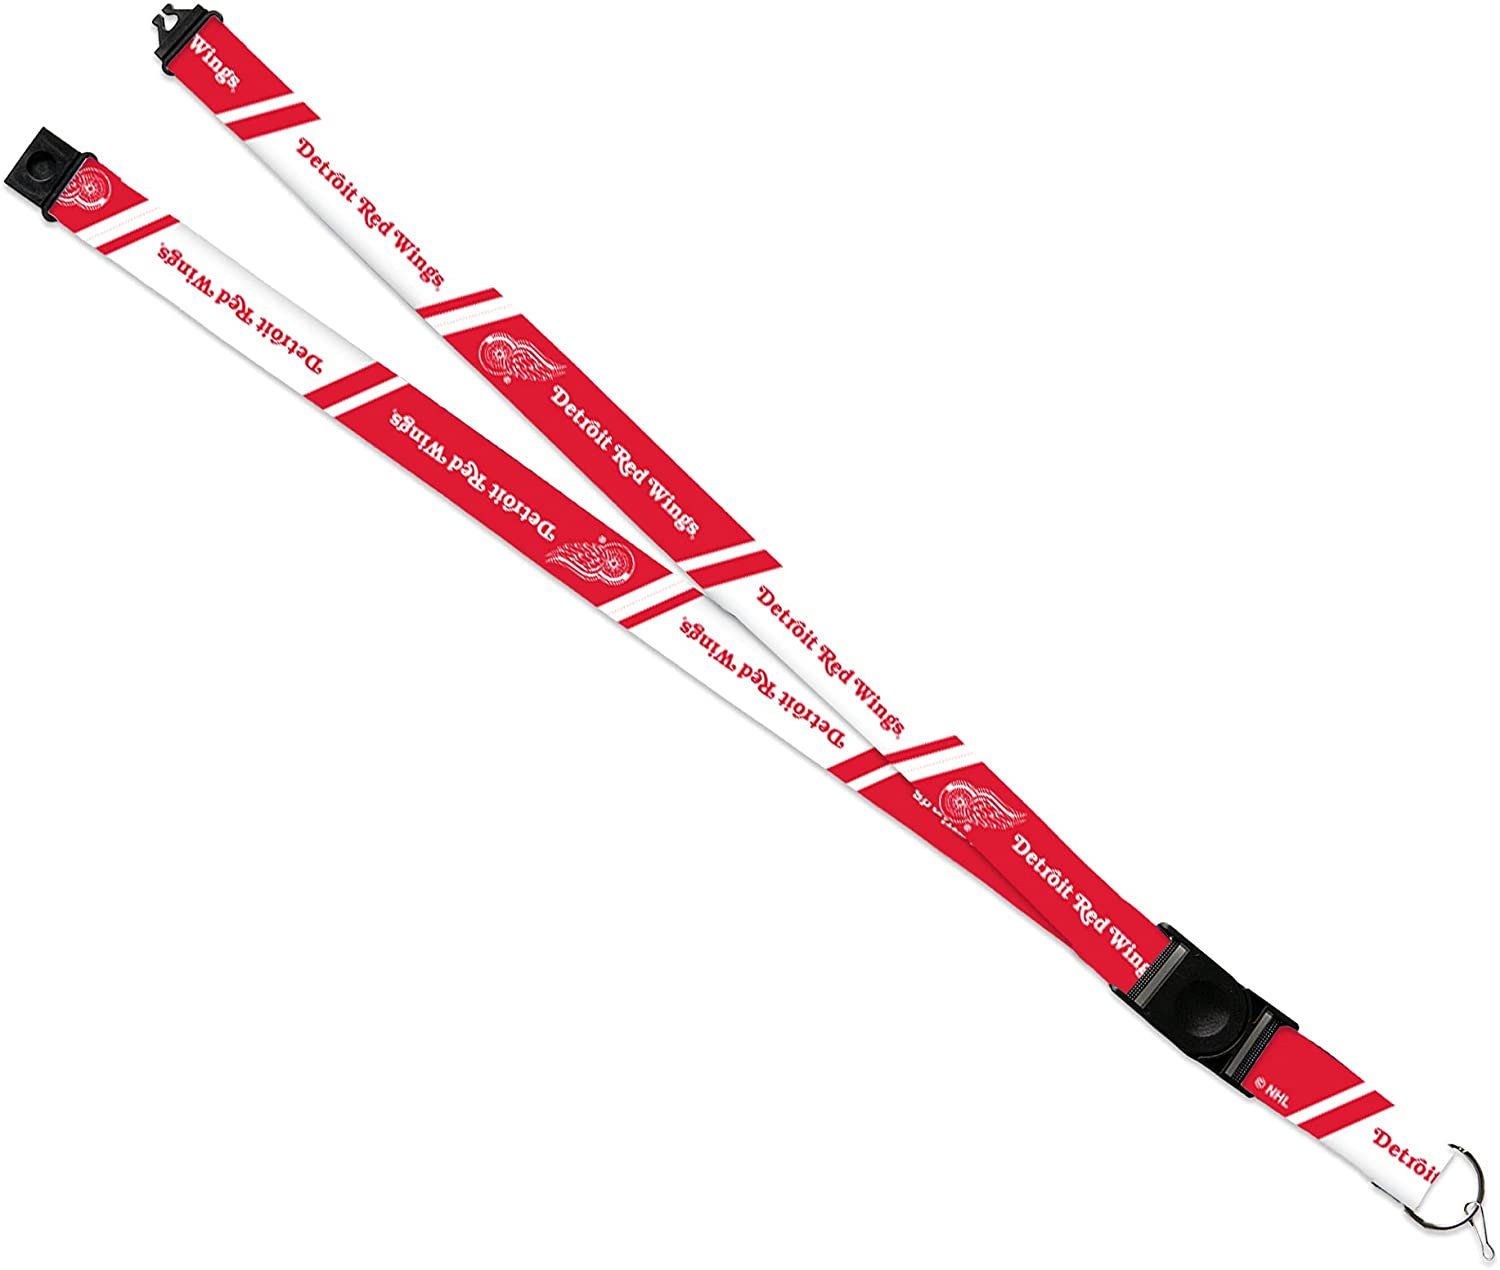 Detroit Red Wings Lanyard Keychain Safety Breakaway Double Sided